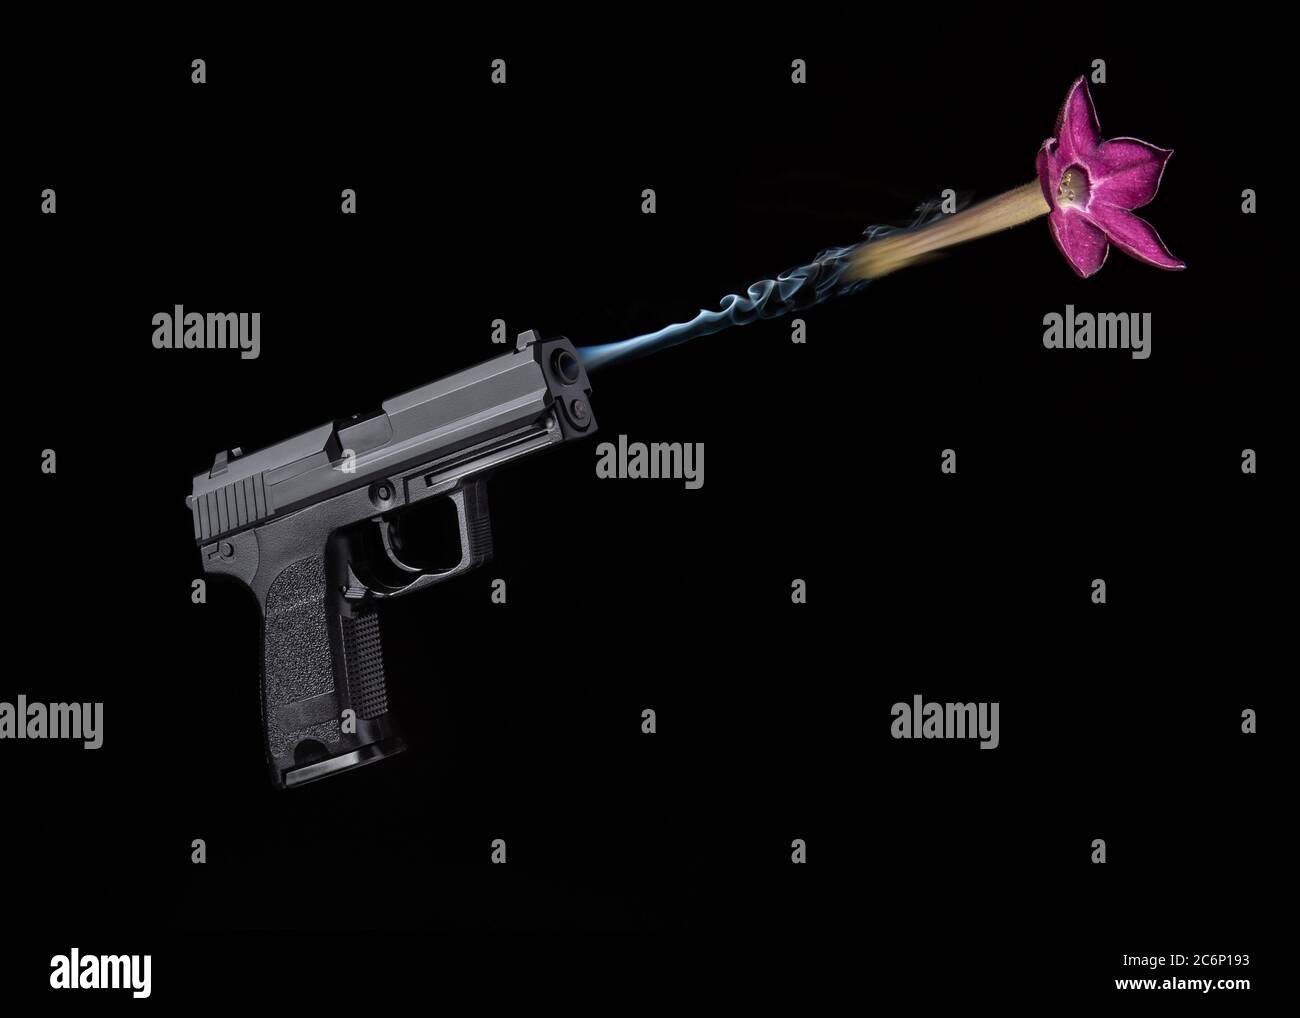 Shooting with flowers, stop violence metaphor Stock Photo